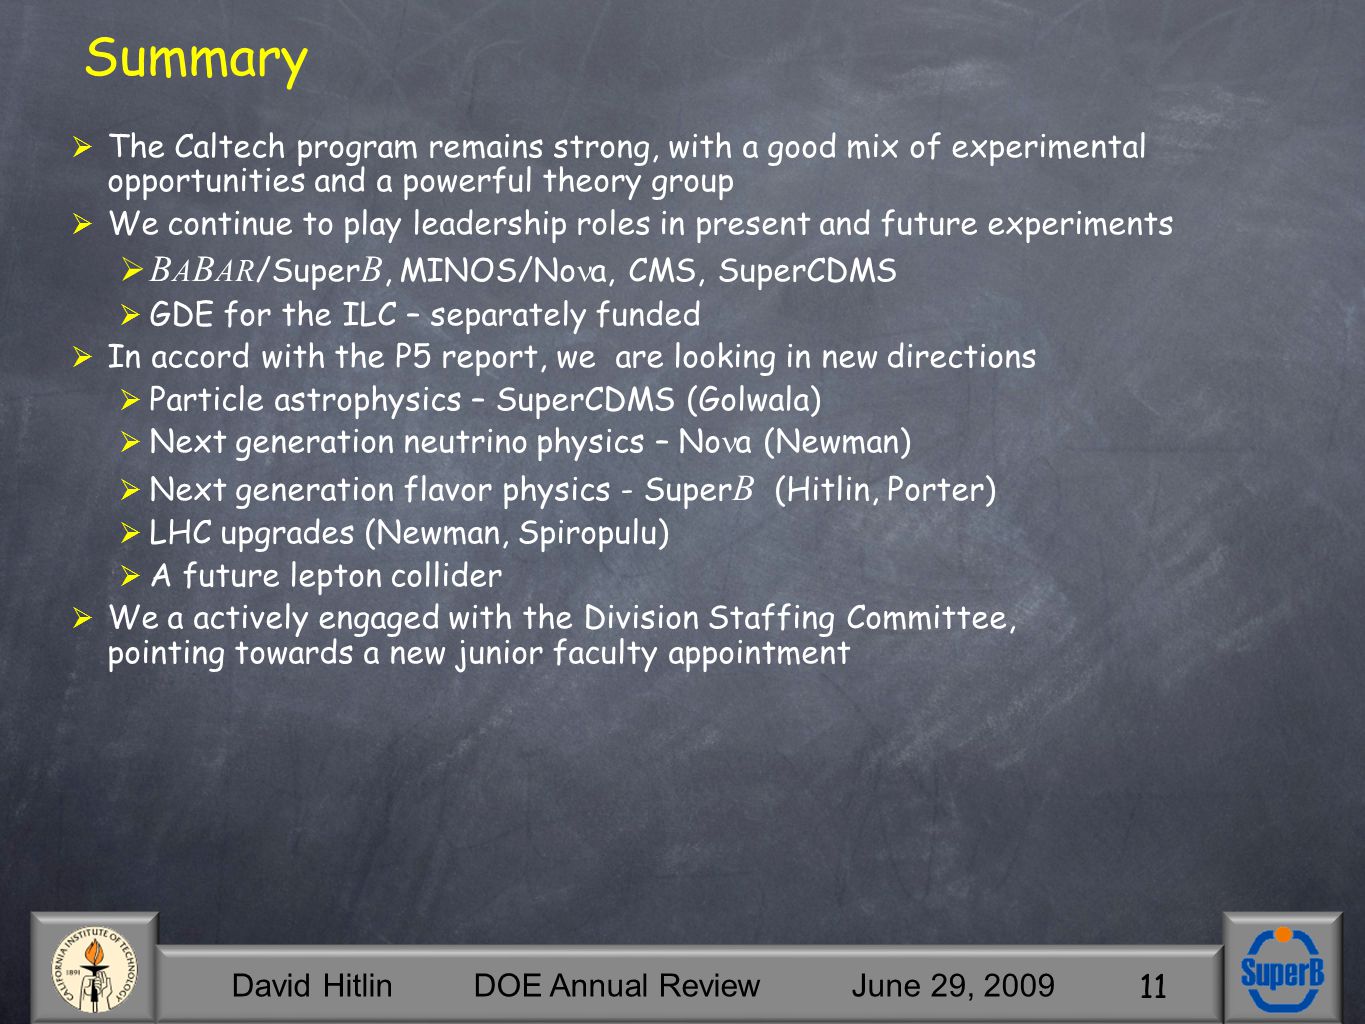 David Hitlin DOE Annual Review June 29, Summary  The Caltech program remains strong, with a good mix of experimental opportunities and a powerful theory group  We continue to play leadership roles in present and future experiments  B A B AR /Super B, MINOS/No a, CMS, SuperCDMS  GDE for the ILC – separately funded  In accord with the P5 report, we are looking in new directions  Particle astrophysics – SuperCDMS (Golwala)  Next generation neutrino physics – No a (Newman)  Next generation flavor physics - Super B (Hitlin, Porter)  LHC upgrades (Newman, Spiropulu)  A future lepton collider  We a actively engaged with the Division Staffing Committee, pointing towards a new junior faculty appointment